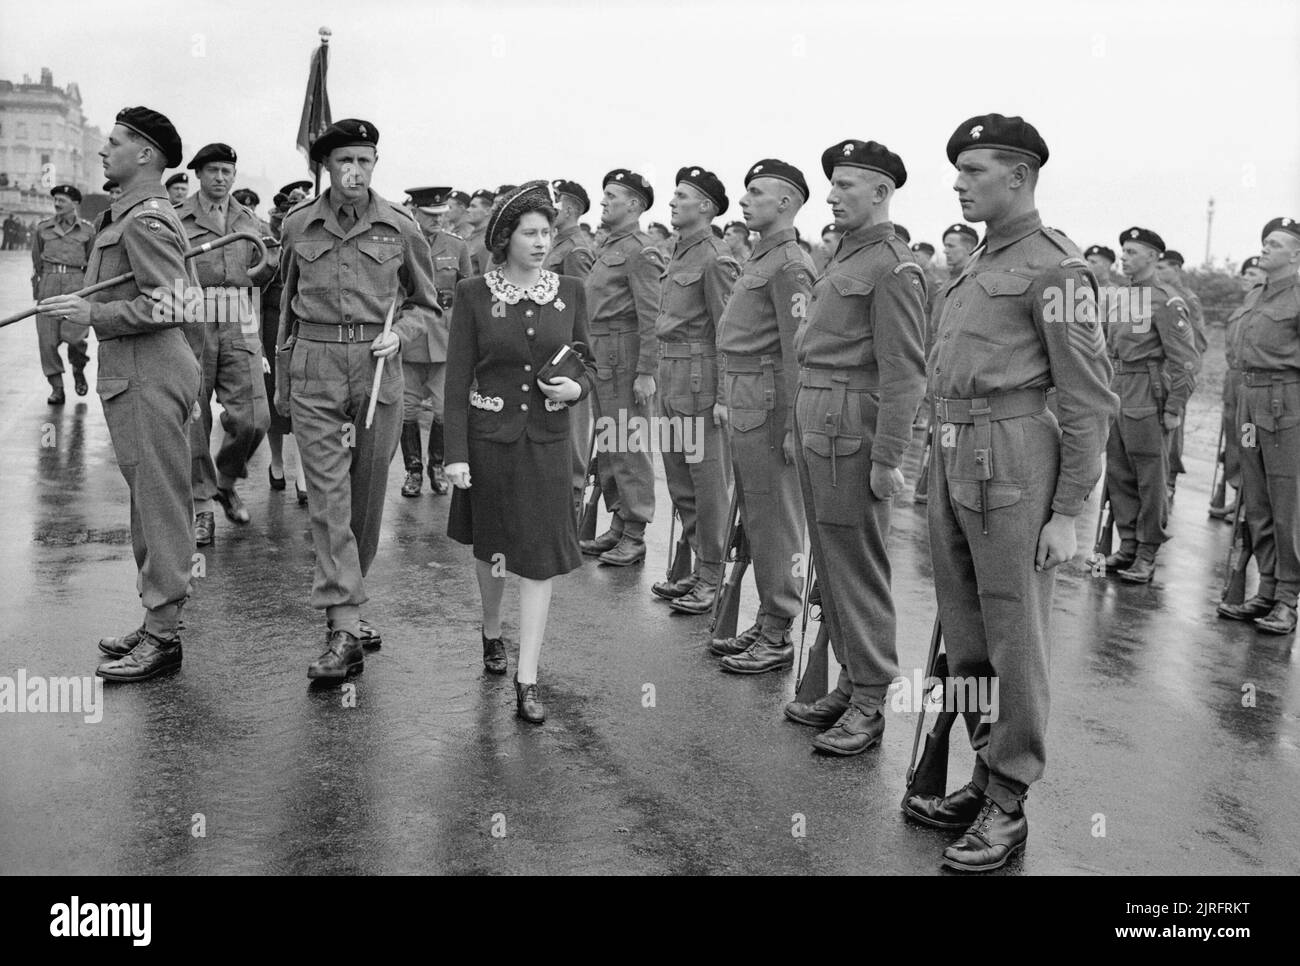 Allied Preparations For D-day Princess Elizabeth inspecting an honour guard during a Royal visit to 2nd (Armoured) Battalion Grenadier Guards, 5th Guards Armoured Brigade, Guards Armoured Division, at Hove, 17 May 1944. Stock Photo